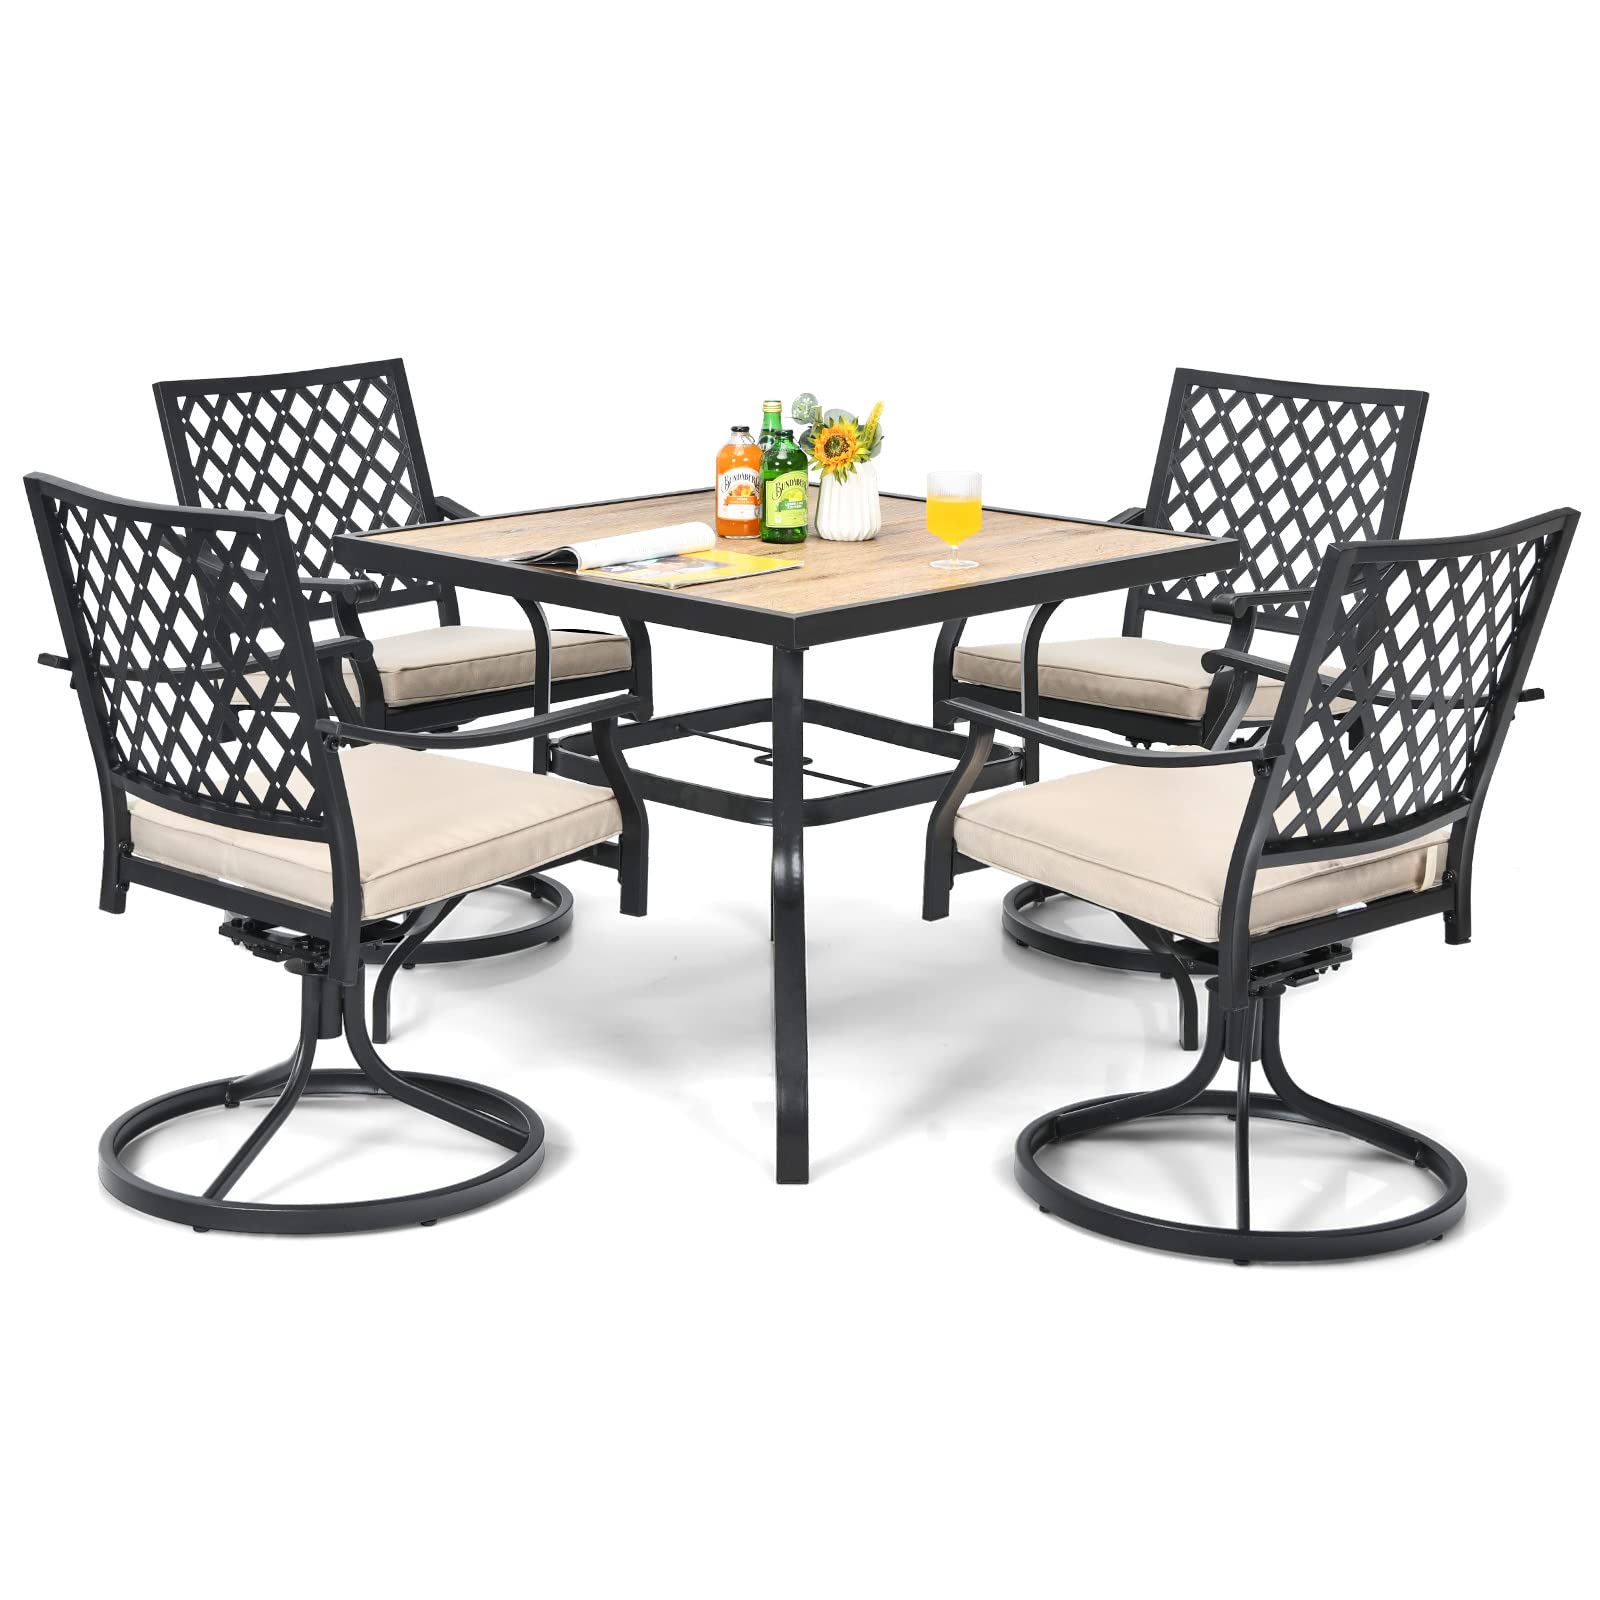 5 Piece Patio Dining Set, Outdoor Square Bistro Table for 4